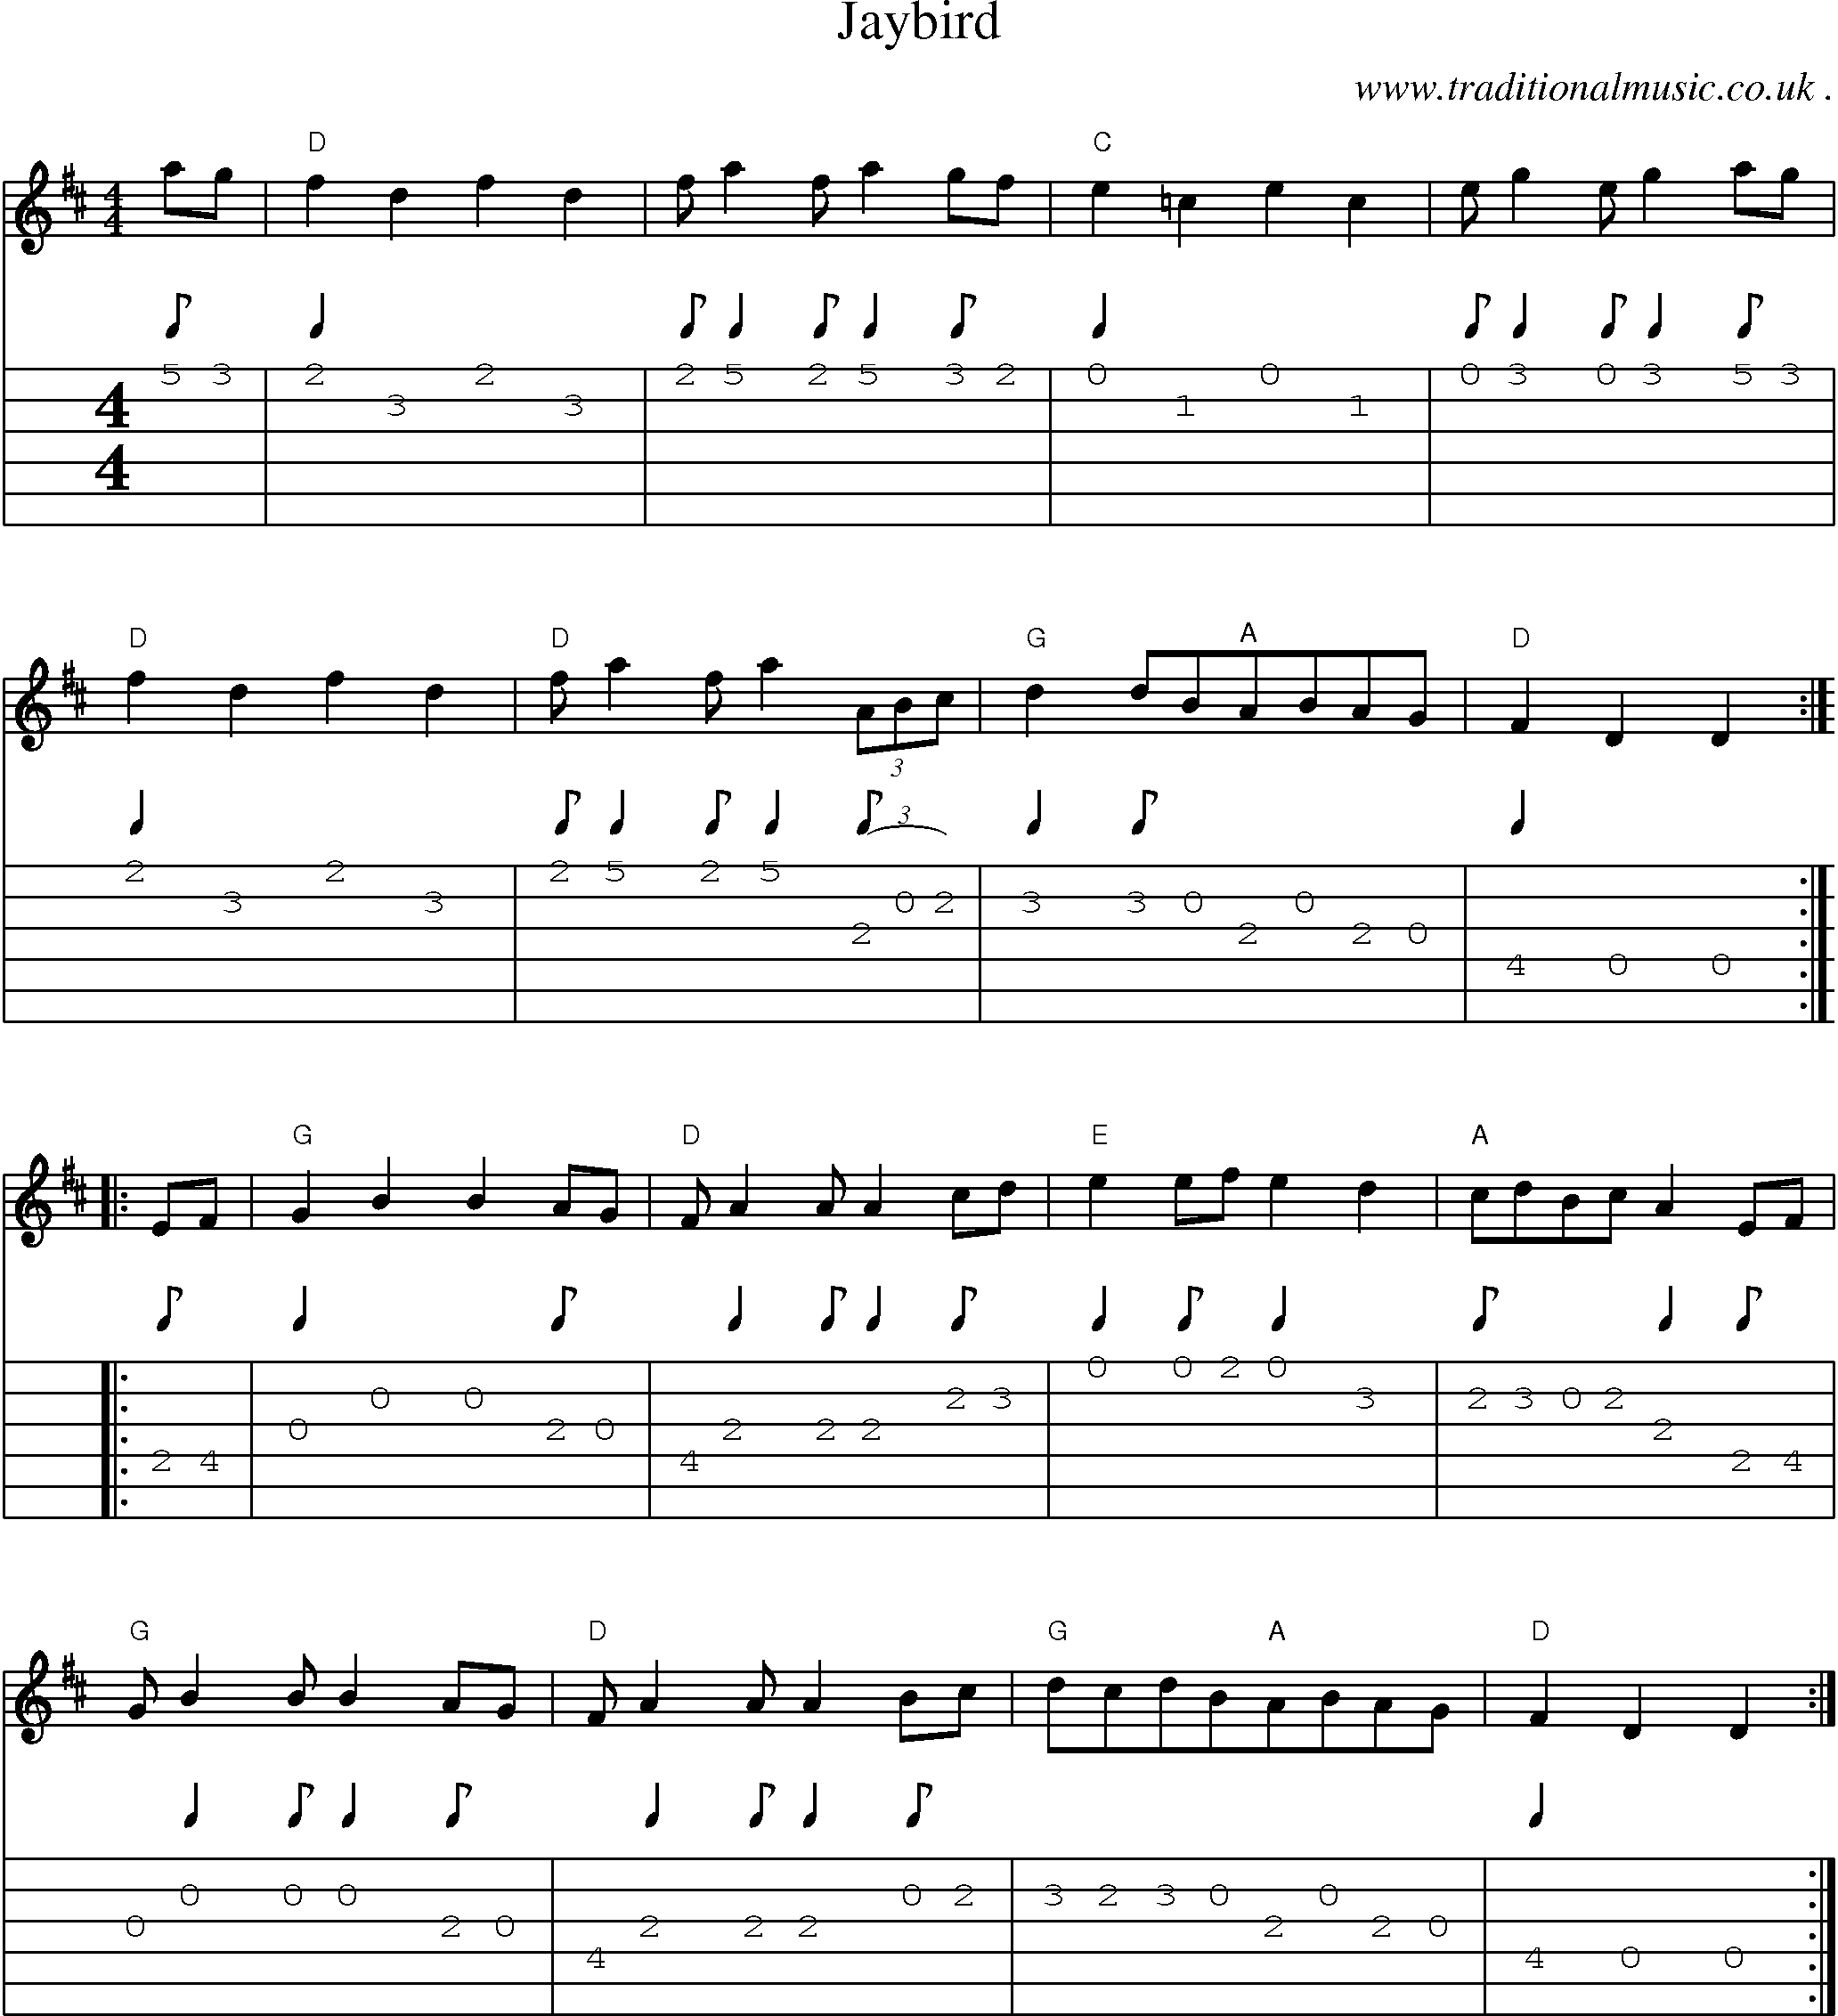 Music Score and Guitar Tabs for Jaybird